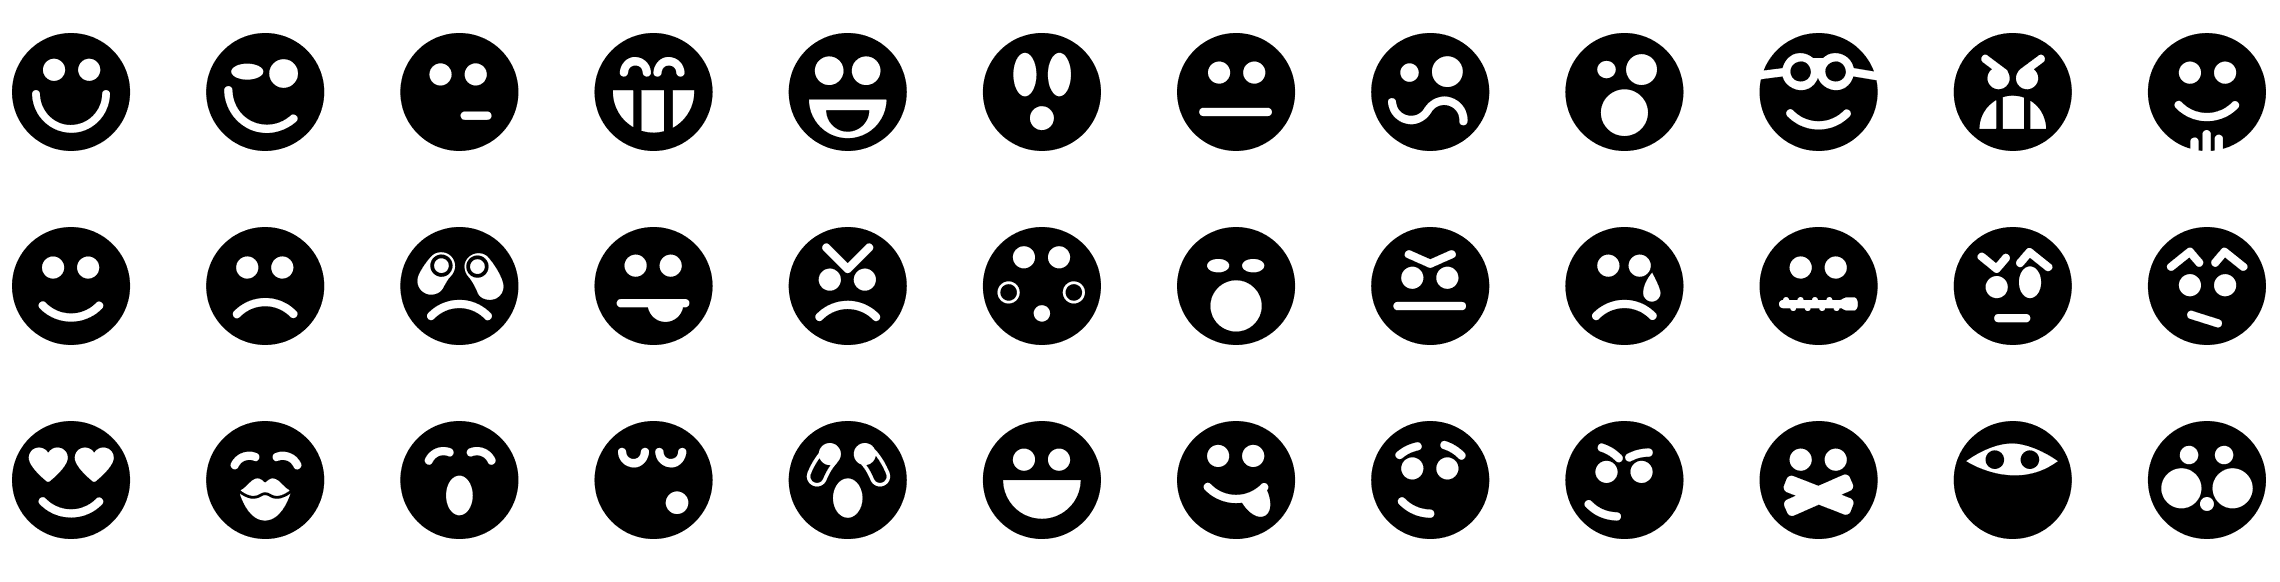 emoticons-2-glyph-icons-preview